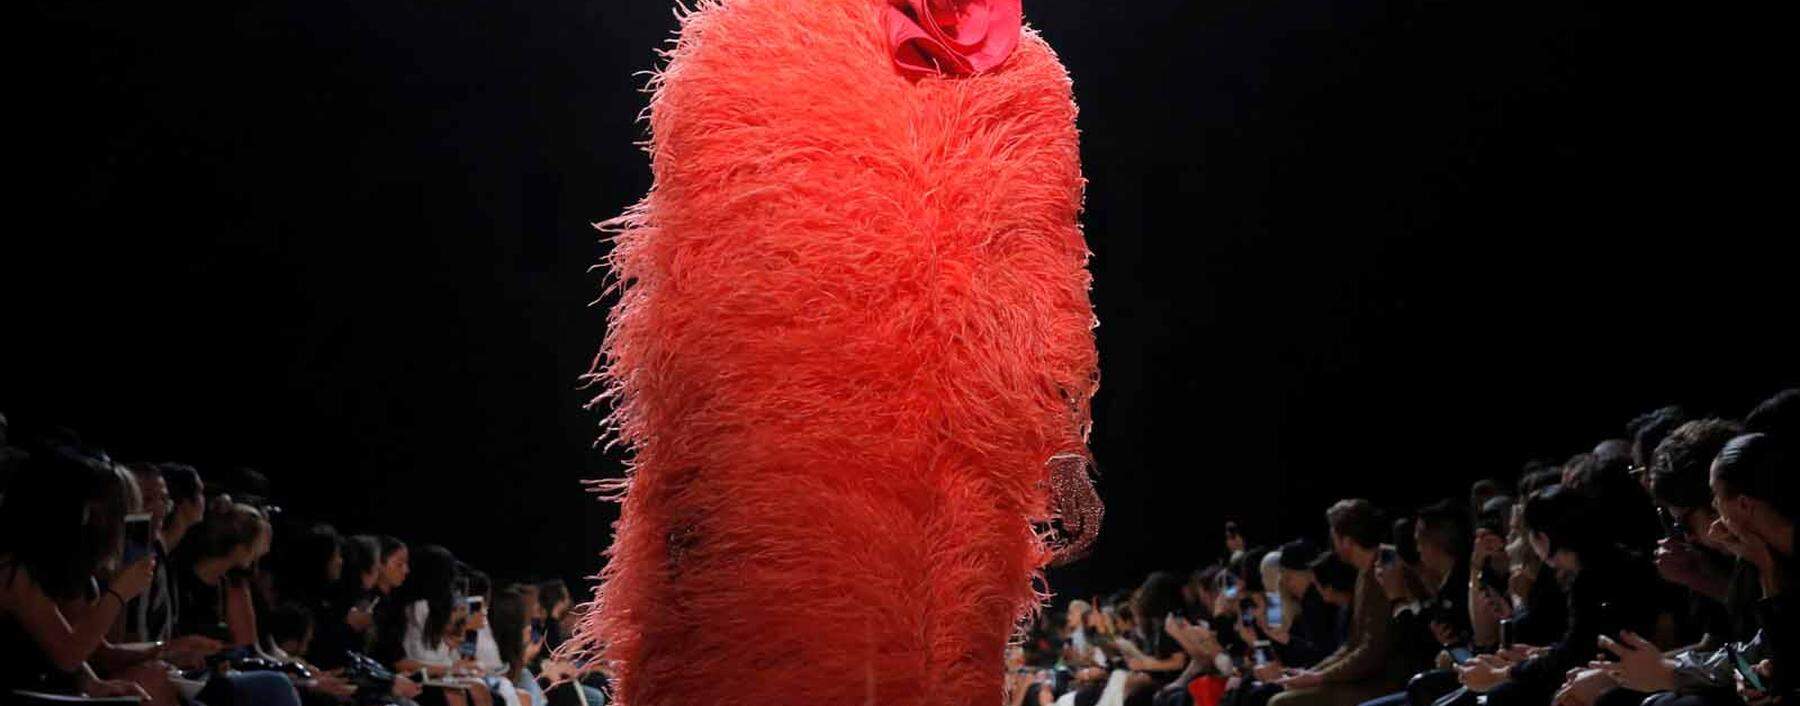 A model presents a creation from the Marc Jacobs Spring/Summer 2019 collection at New York Fashion Week, New York